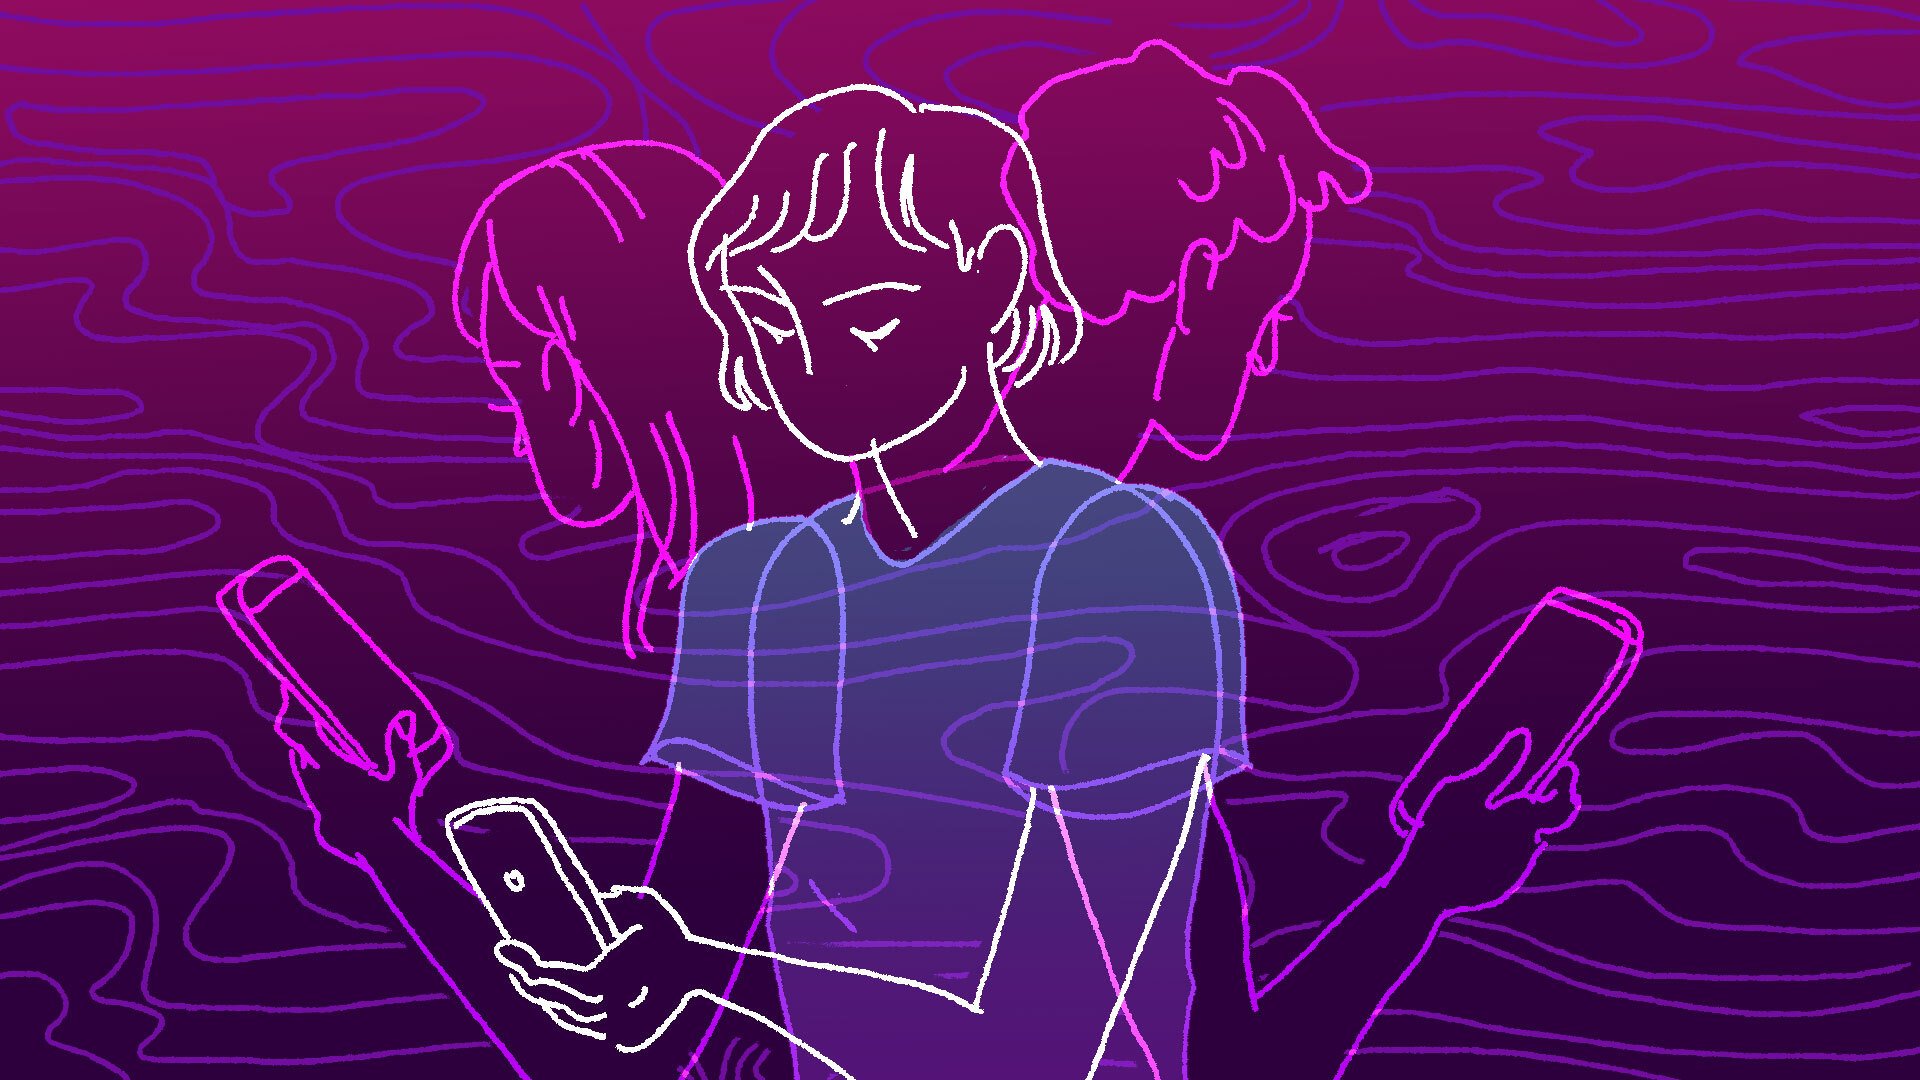 Illustration of a person holding a smartphone on a purple background.